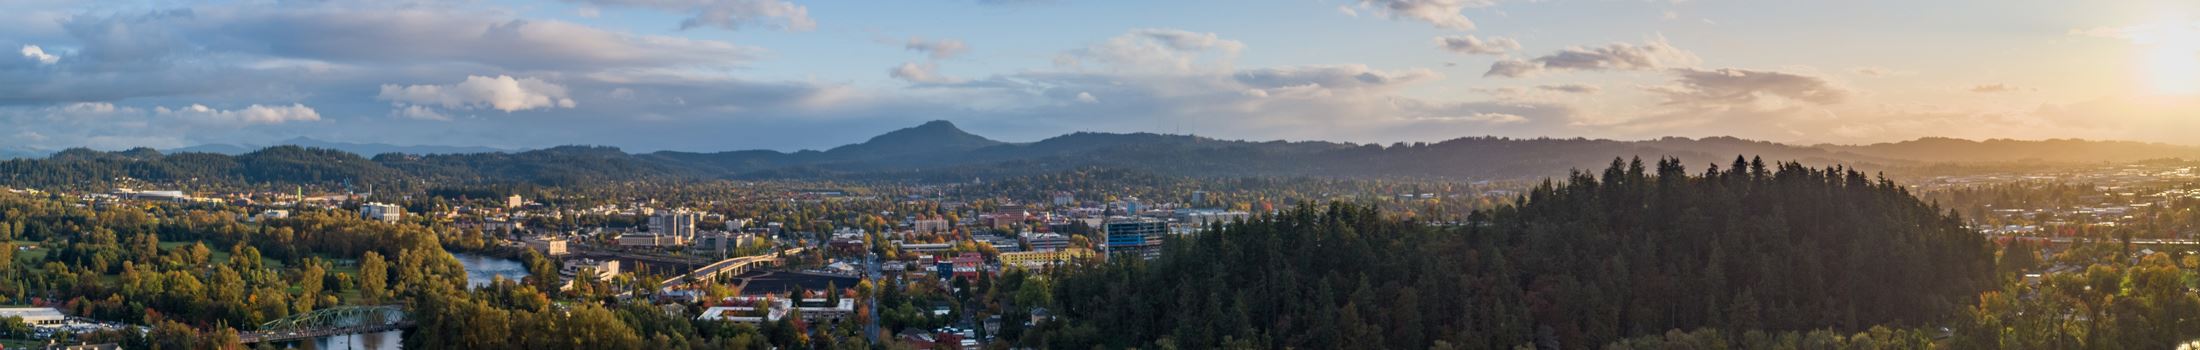 Aerial view of Eugene. Courtesy of the City of Eugene.